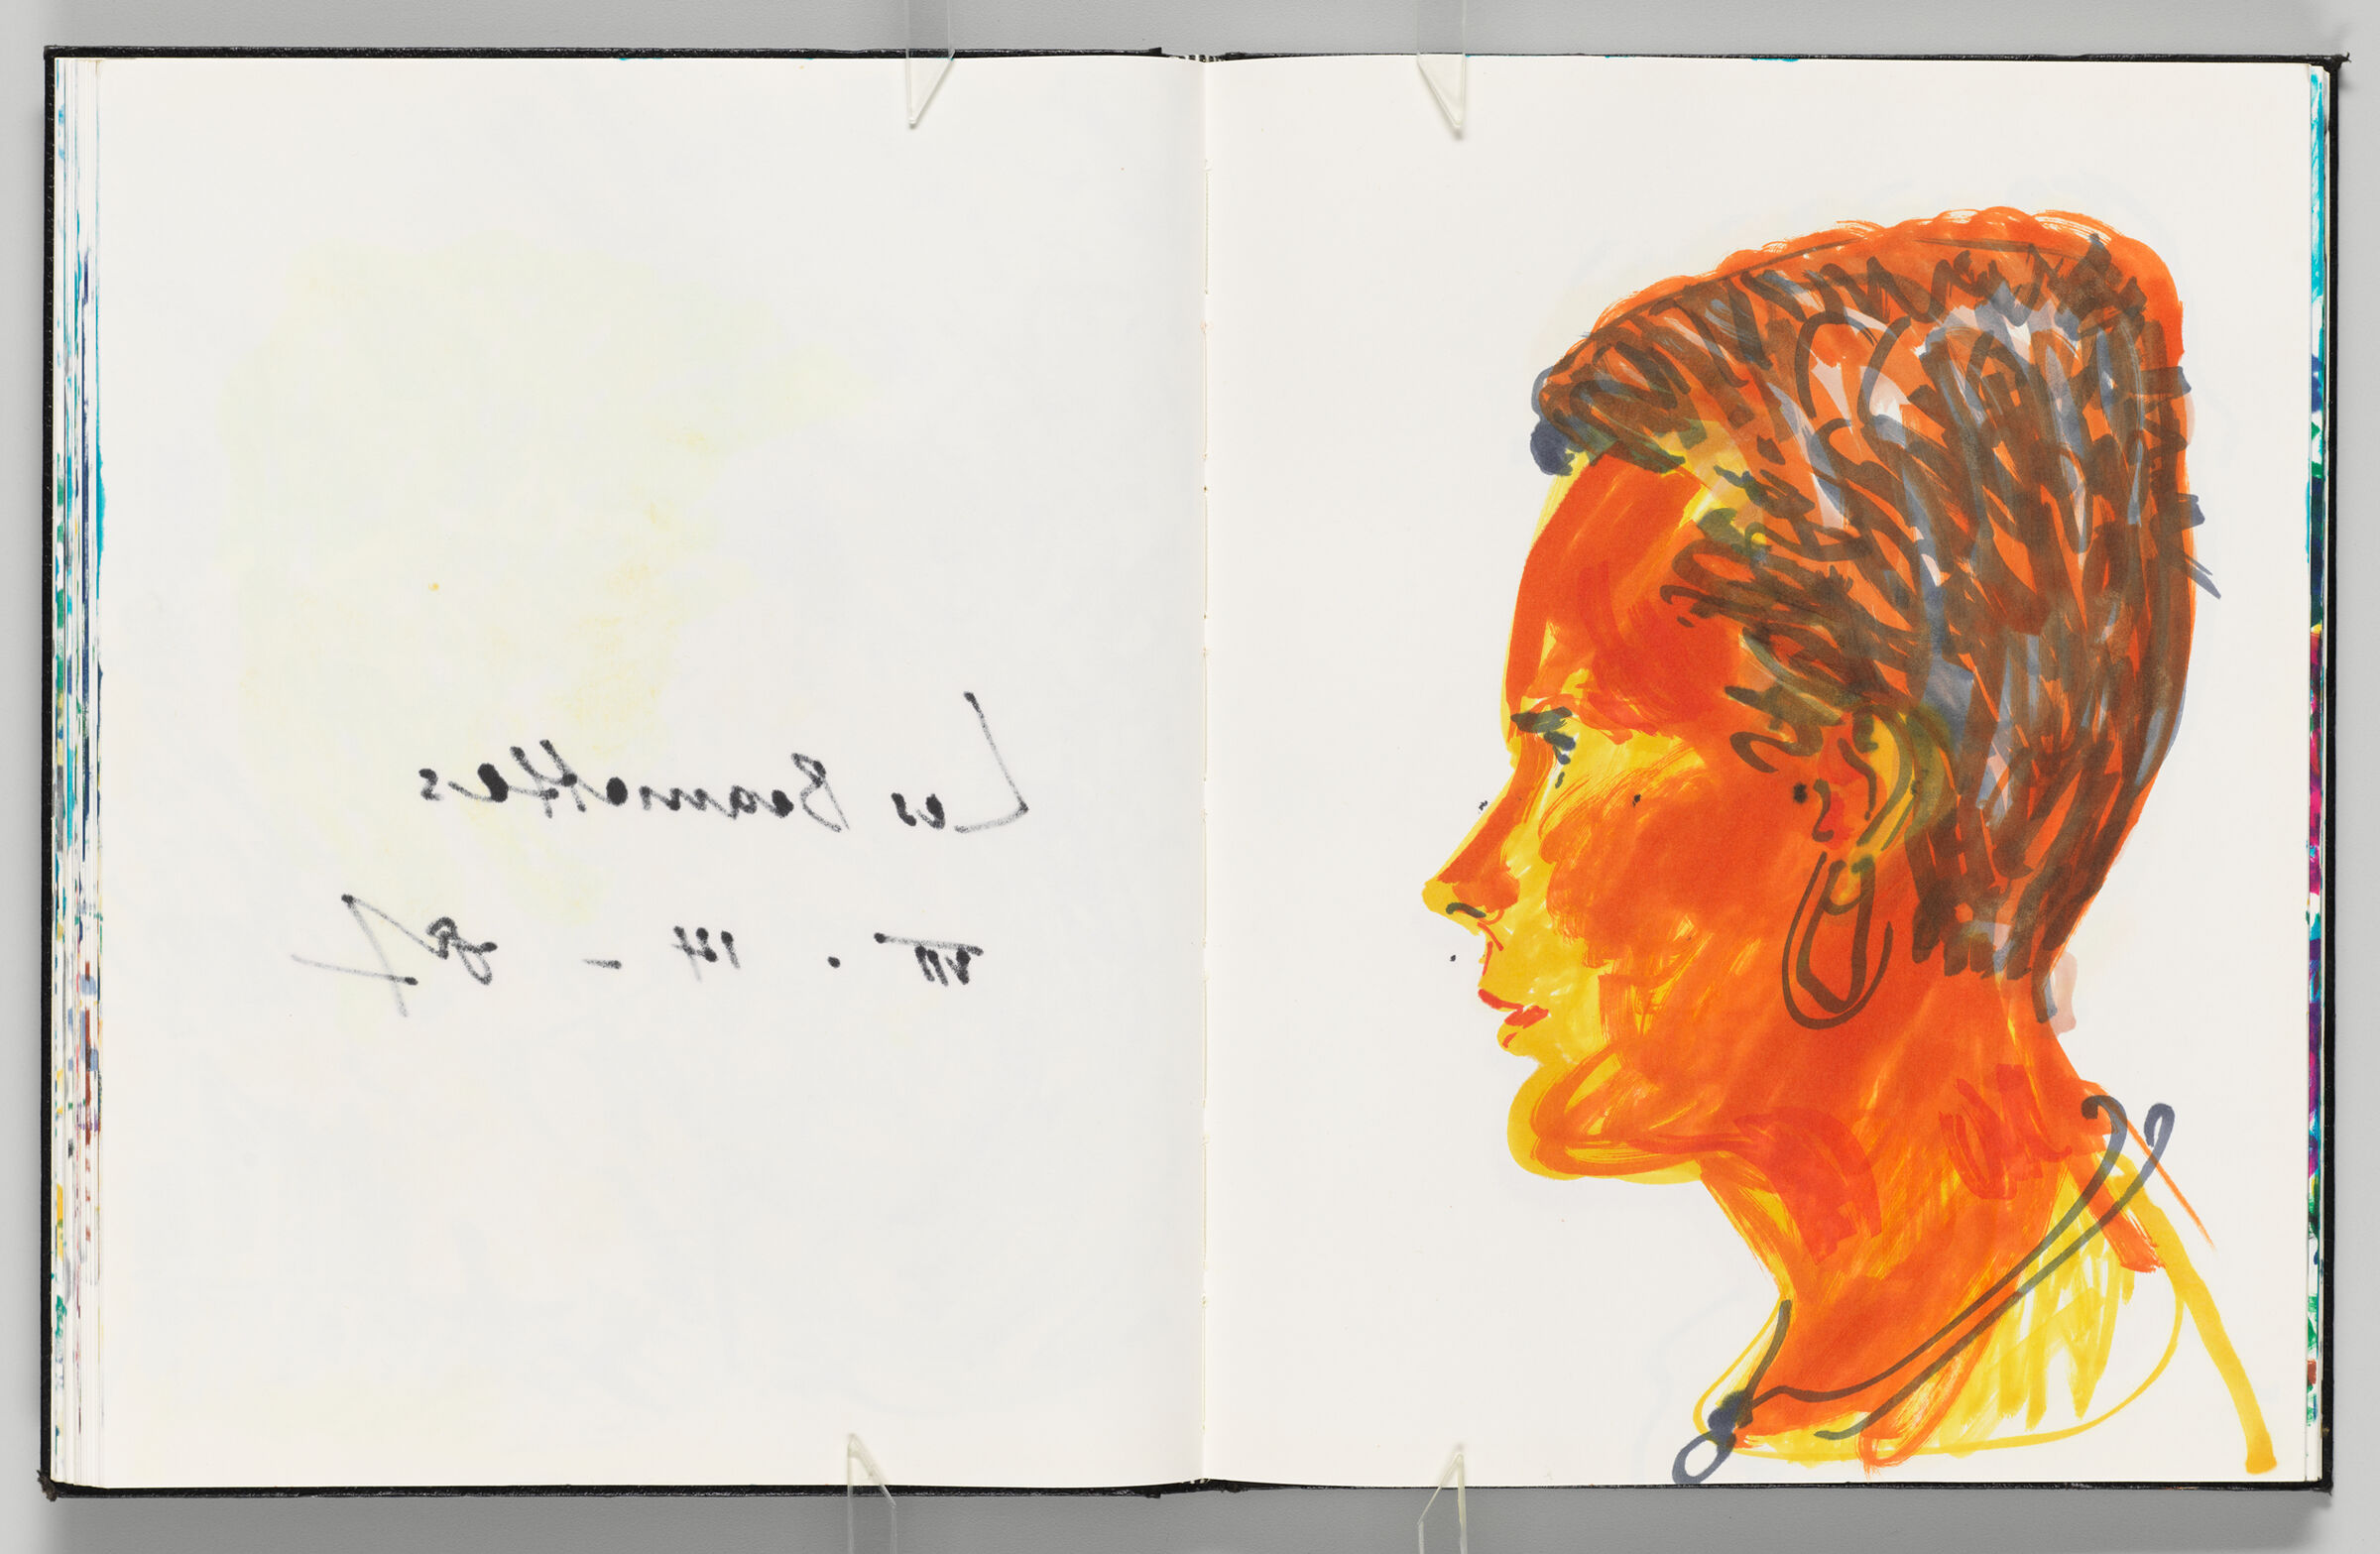 Untitled (Bleed-Through Of Previous Page, Left Page); Untitled (Female Figure [Elizabeth] In Profile, Right Page)